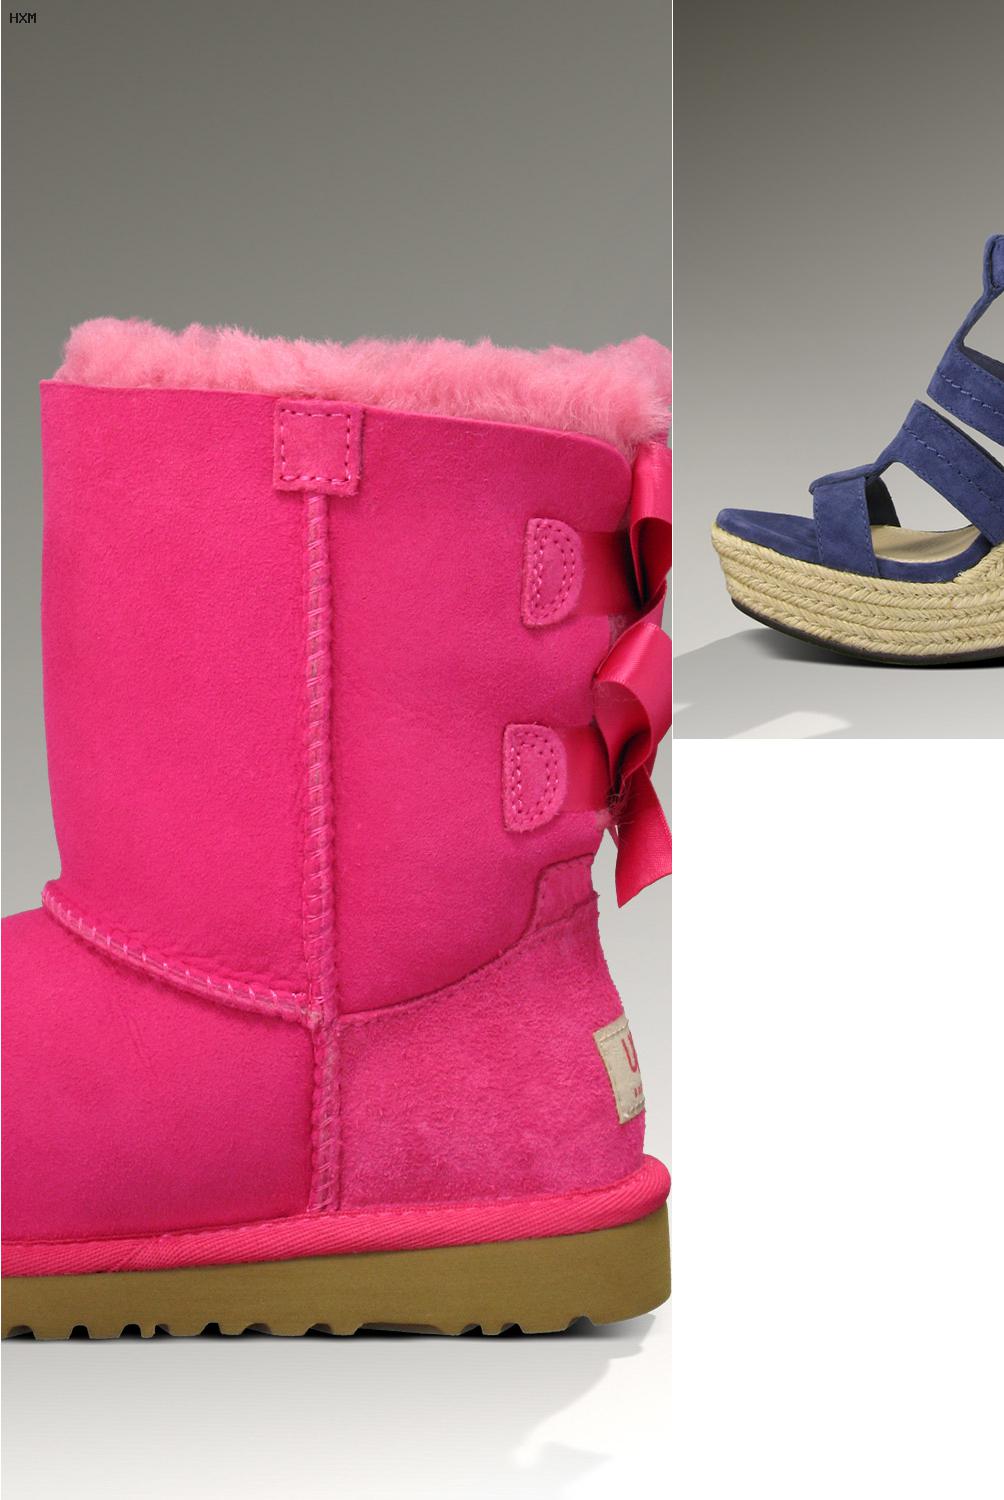 botas tipo ugg impermeables